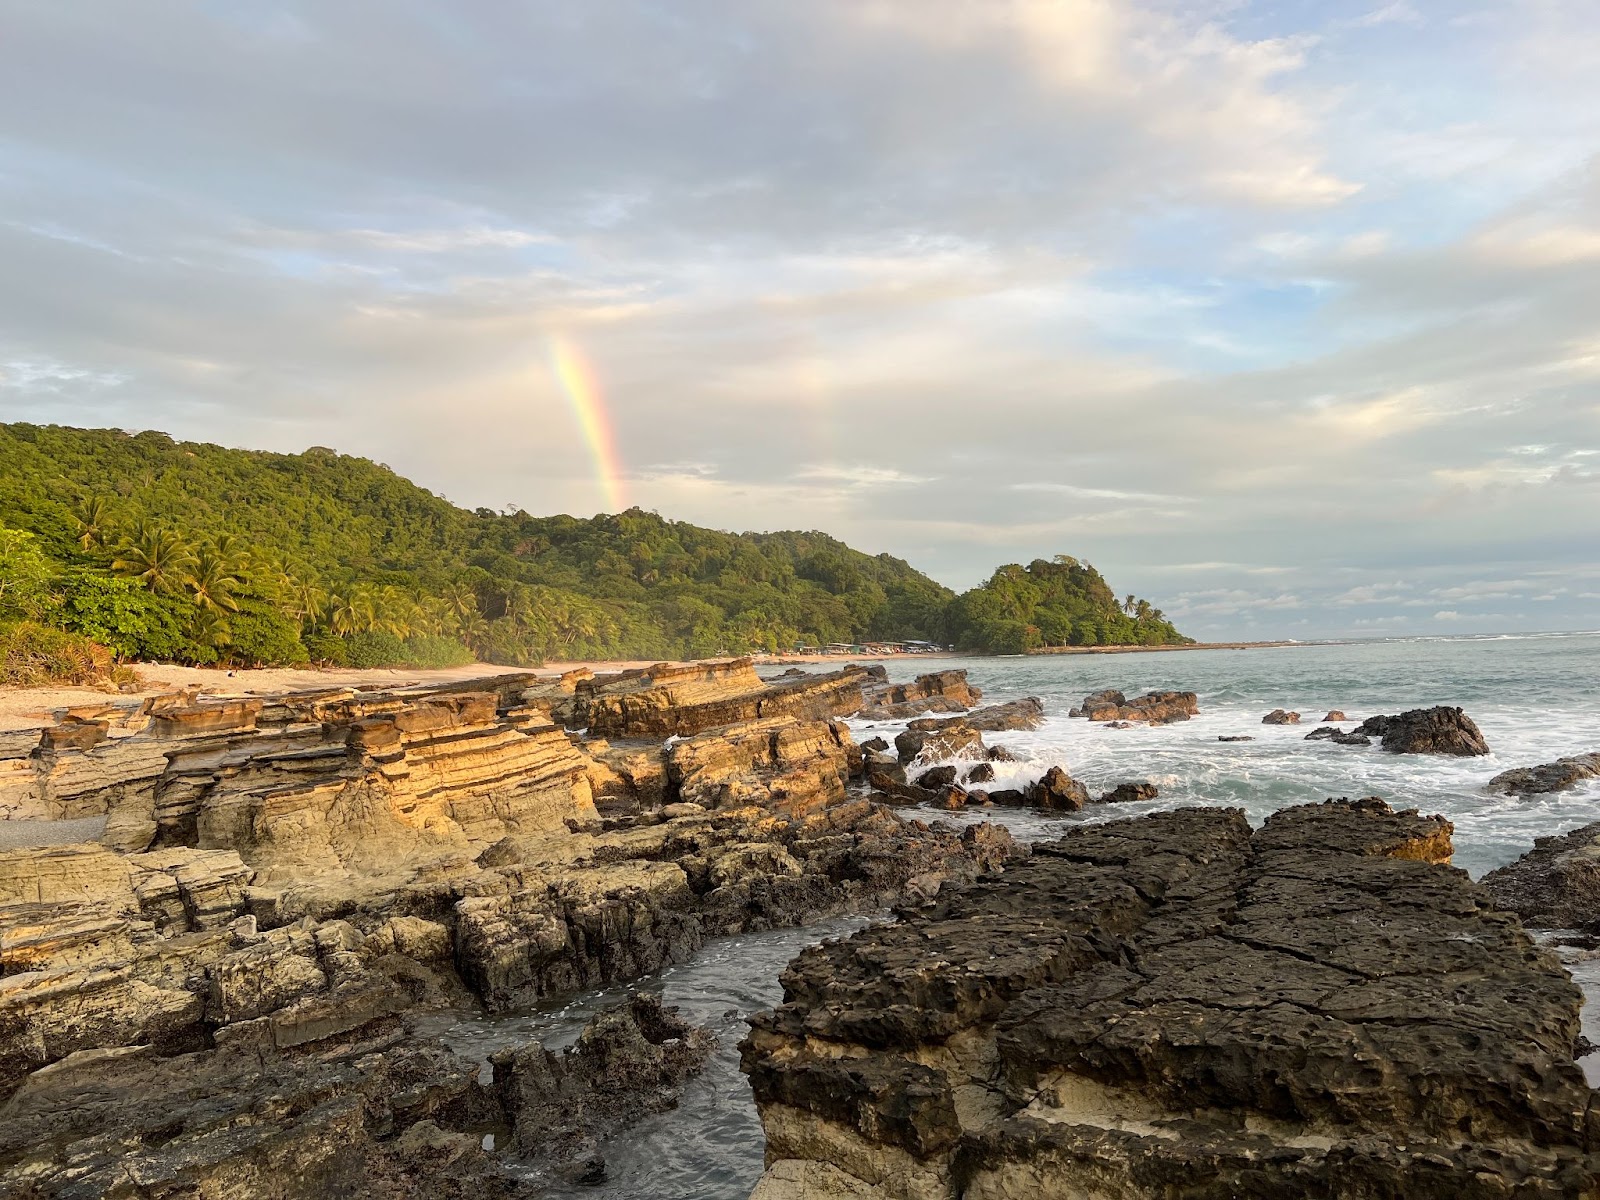 Rainbows at the end of a day of work and travel in Costa Rica